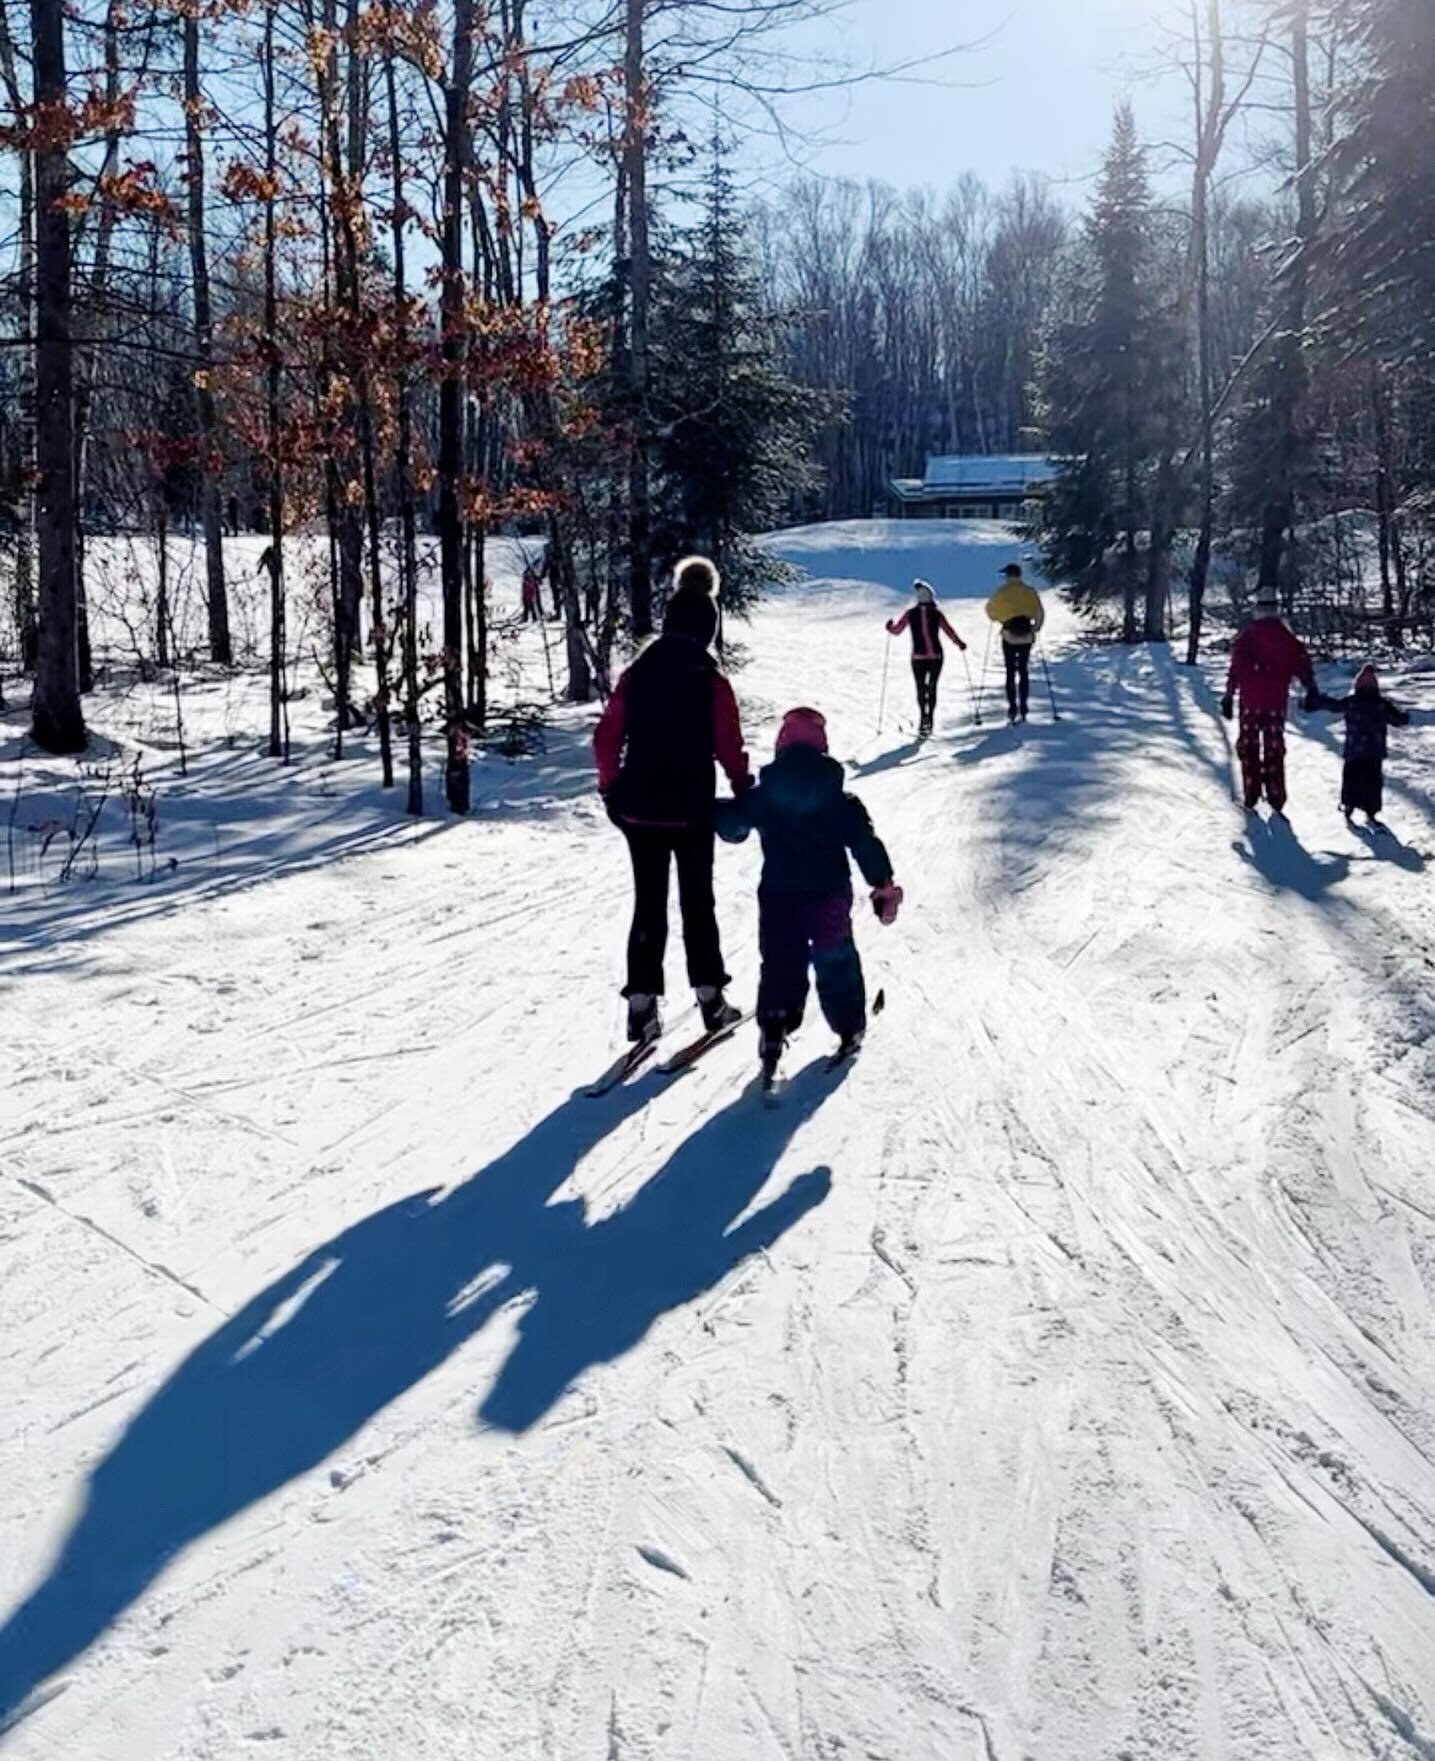 Excited for the first lessons on snow for our JR programs this weekend! ⛷️ 

#arrowheadnordicskiclub #crosscountryskiing #skilessons #muskoka #discovermuskoka #huntsville